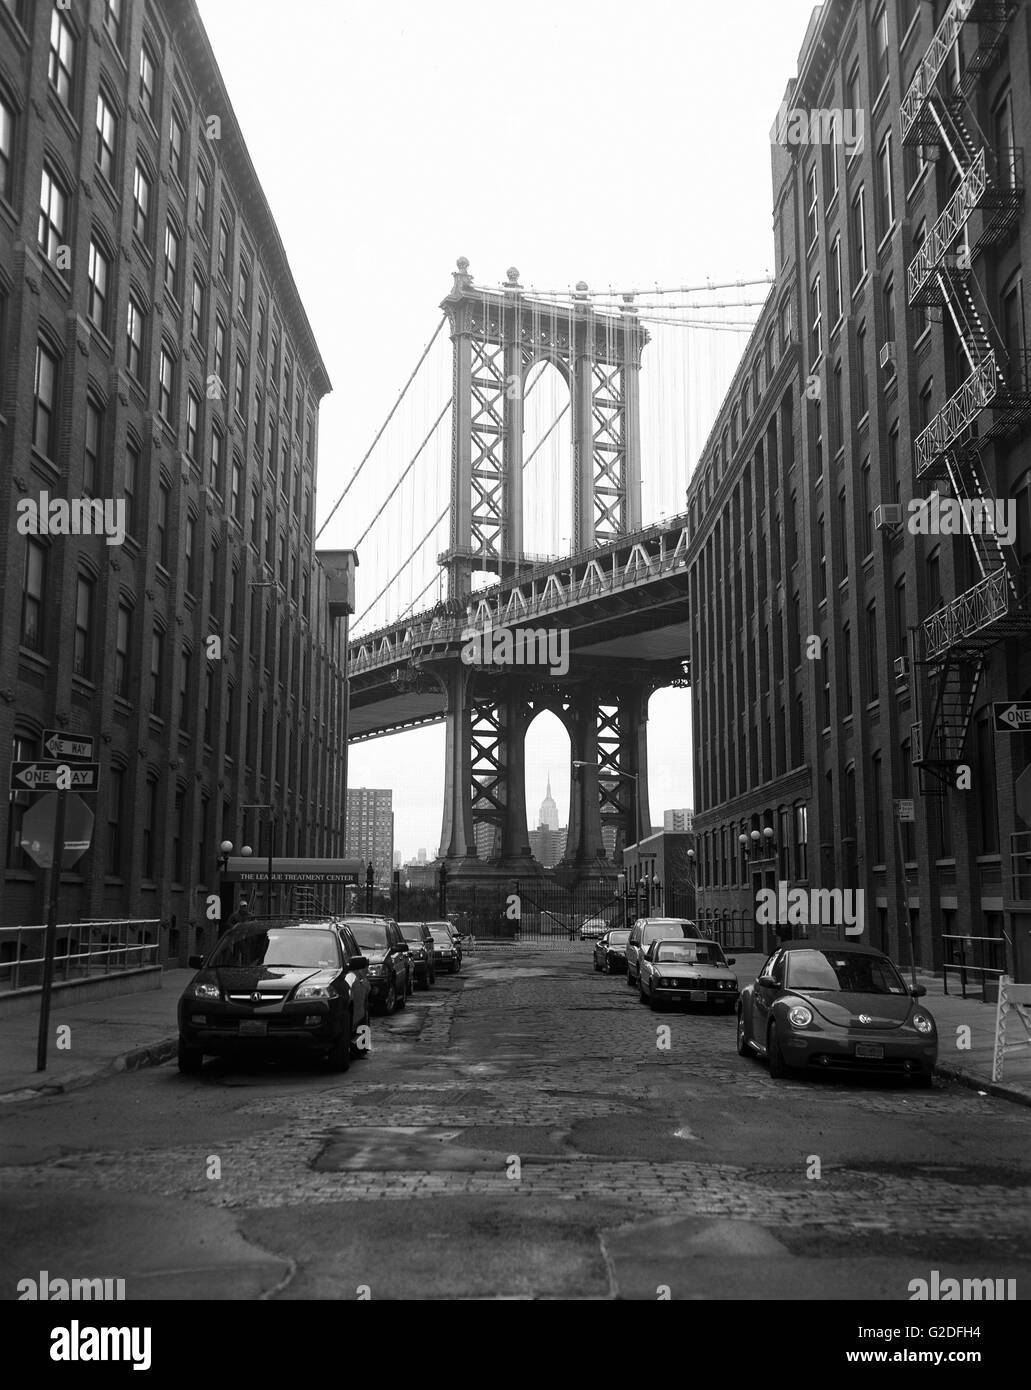 Brooklyn and manhattan bridges Black and White Stock Photos & Images ...